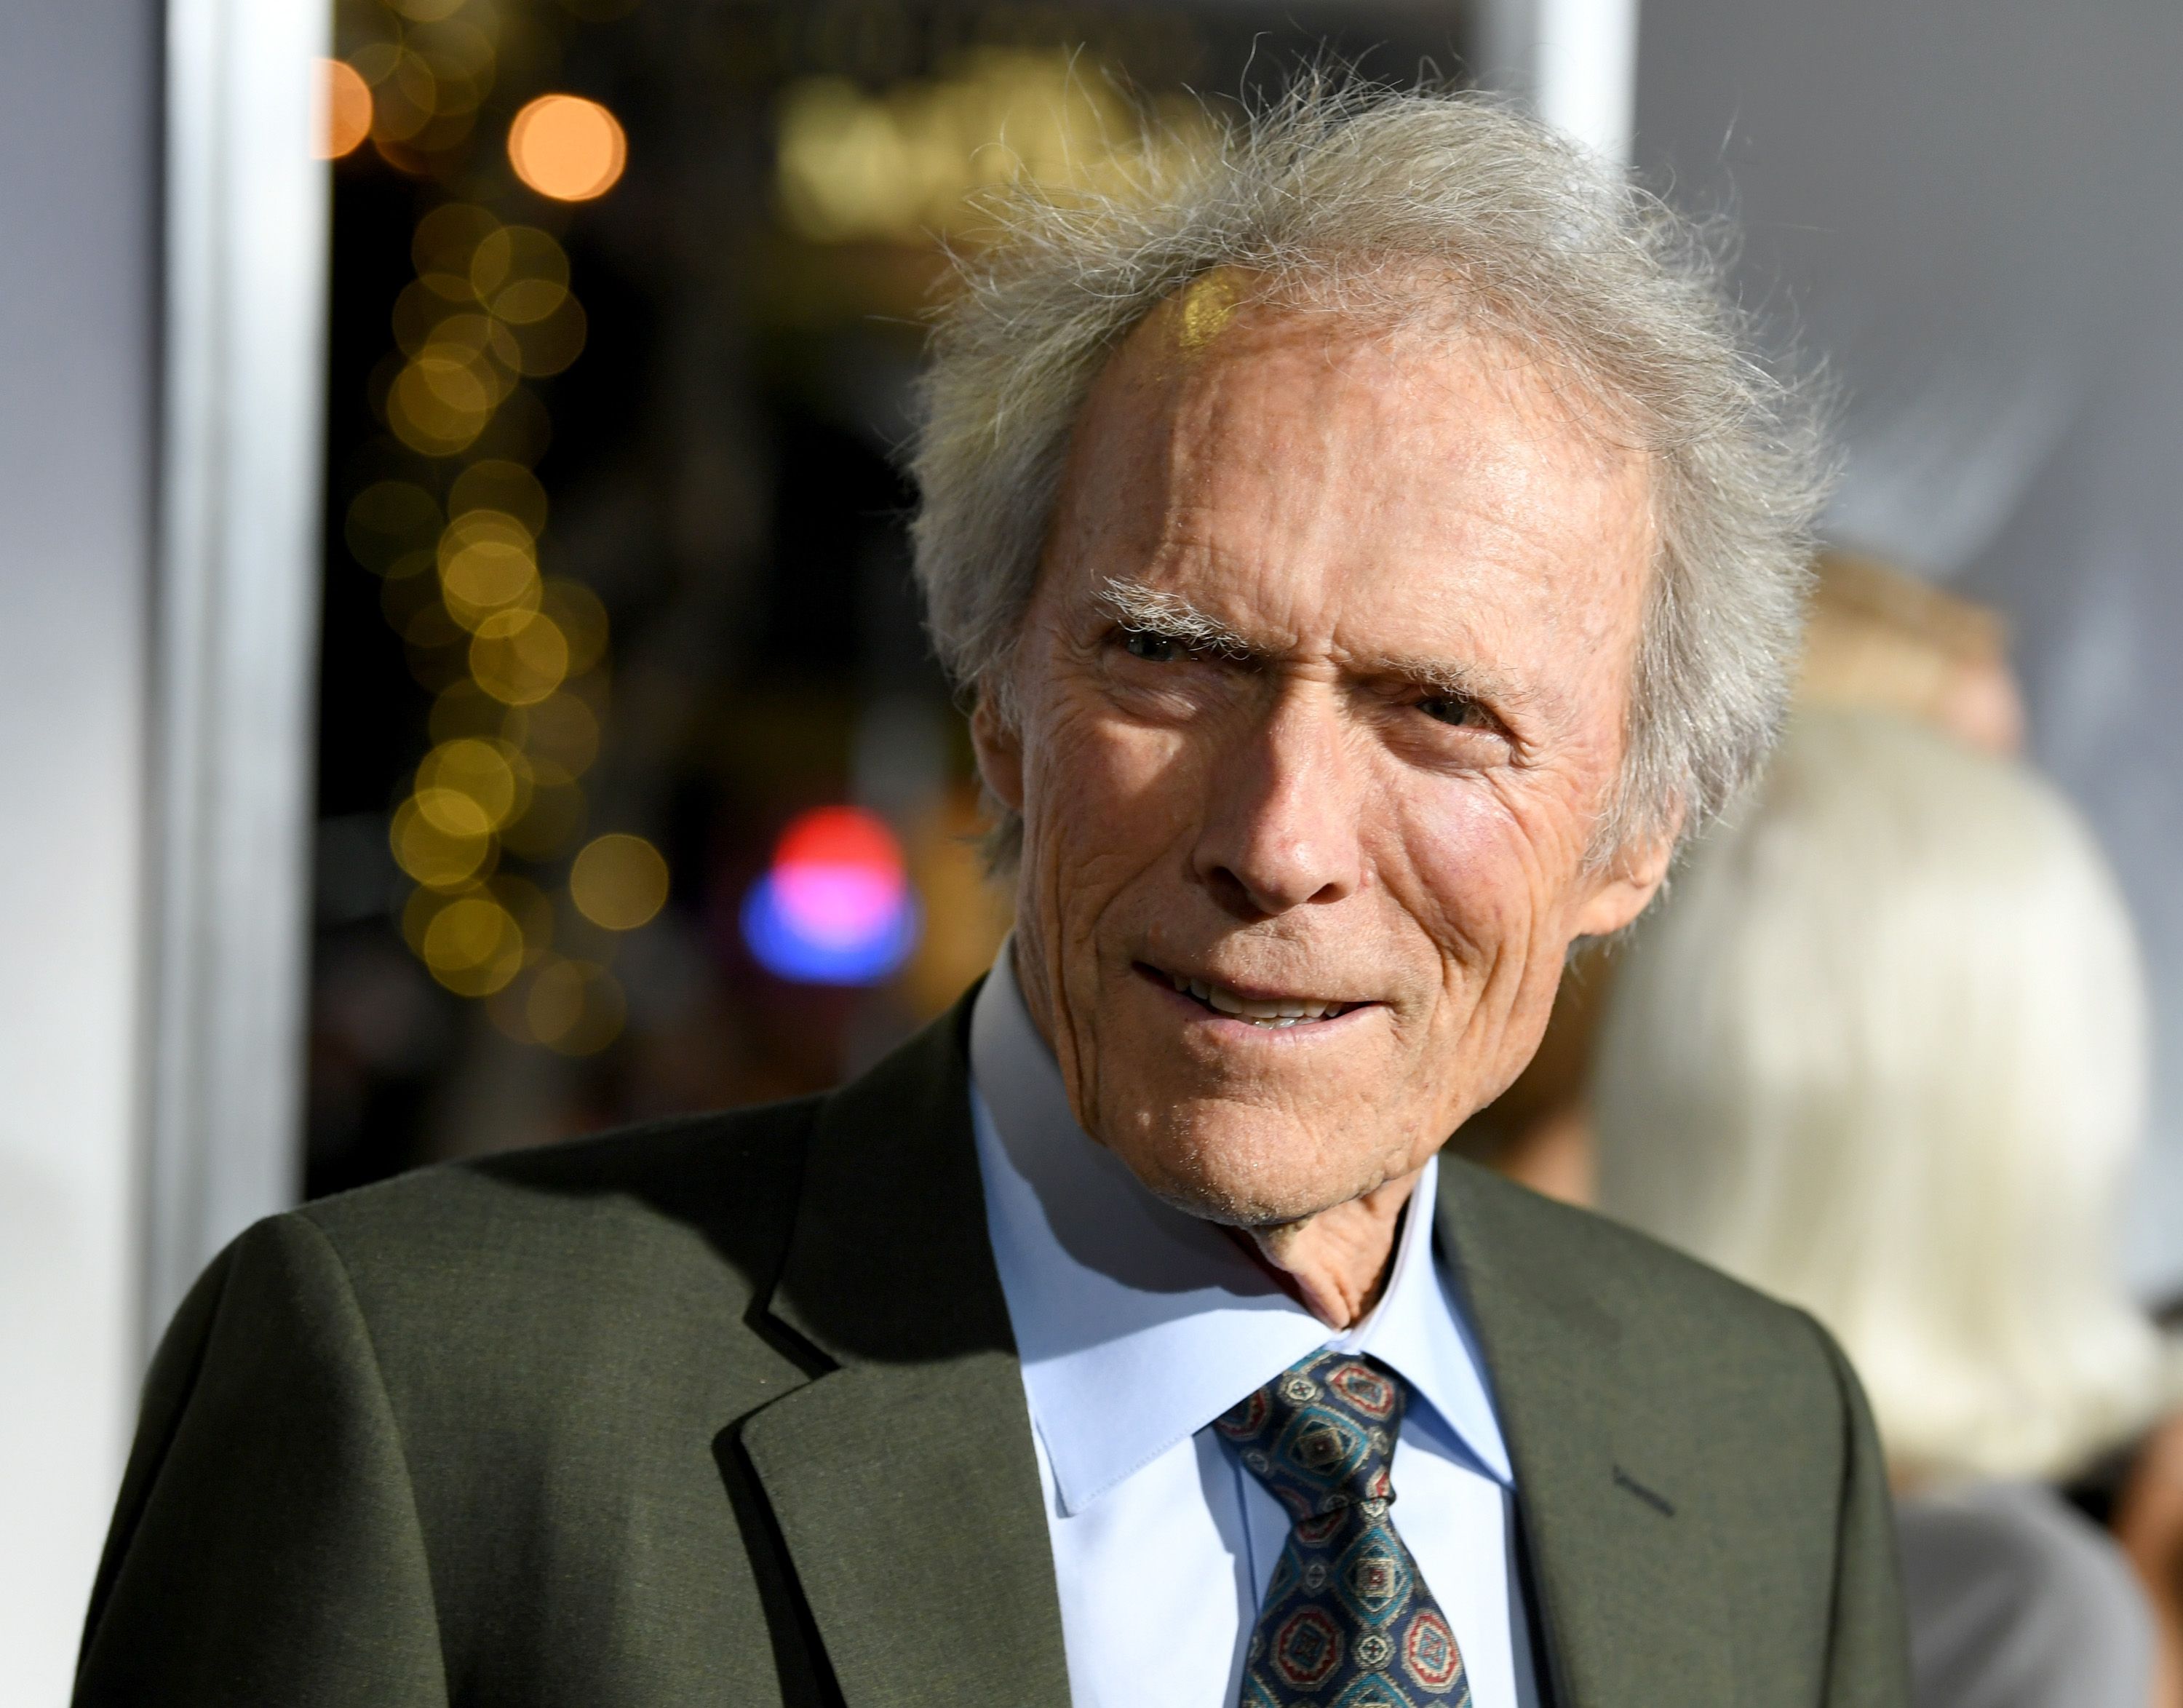 Clint Eastwood arrives at the premiere of Warner Bros. Pictures' "The Mule" at the Village Theatre on December 10, 2018 in Los Angeles, California. | Source: Getty Images